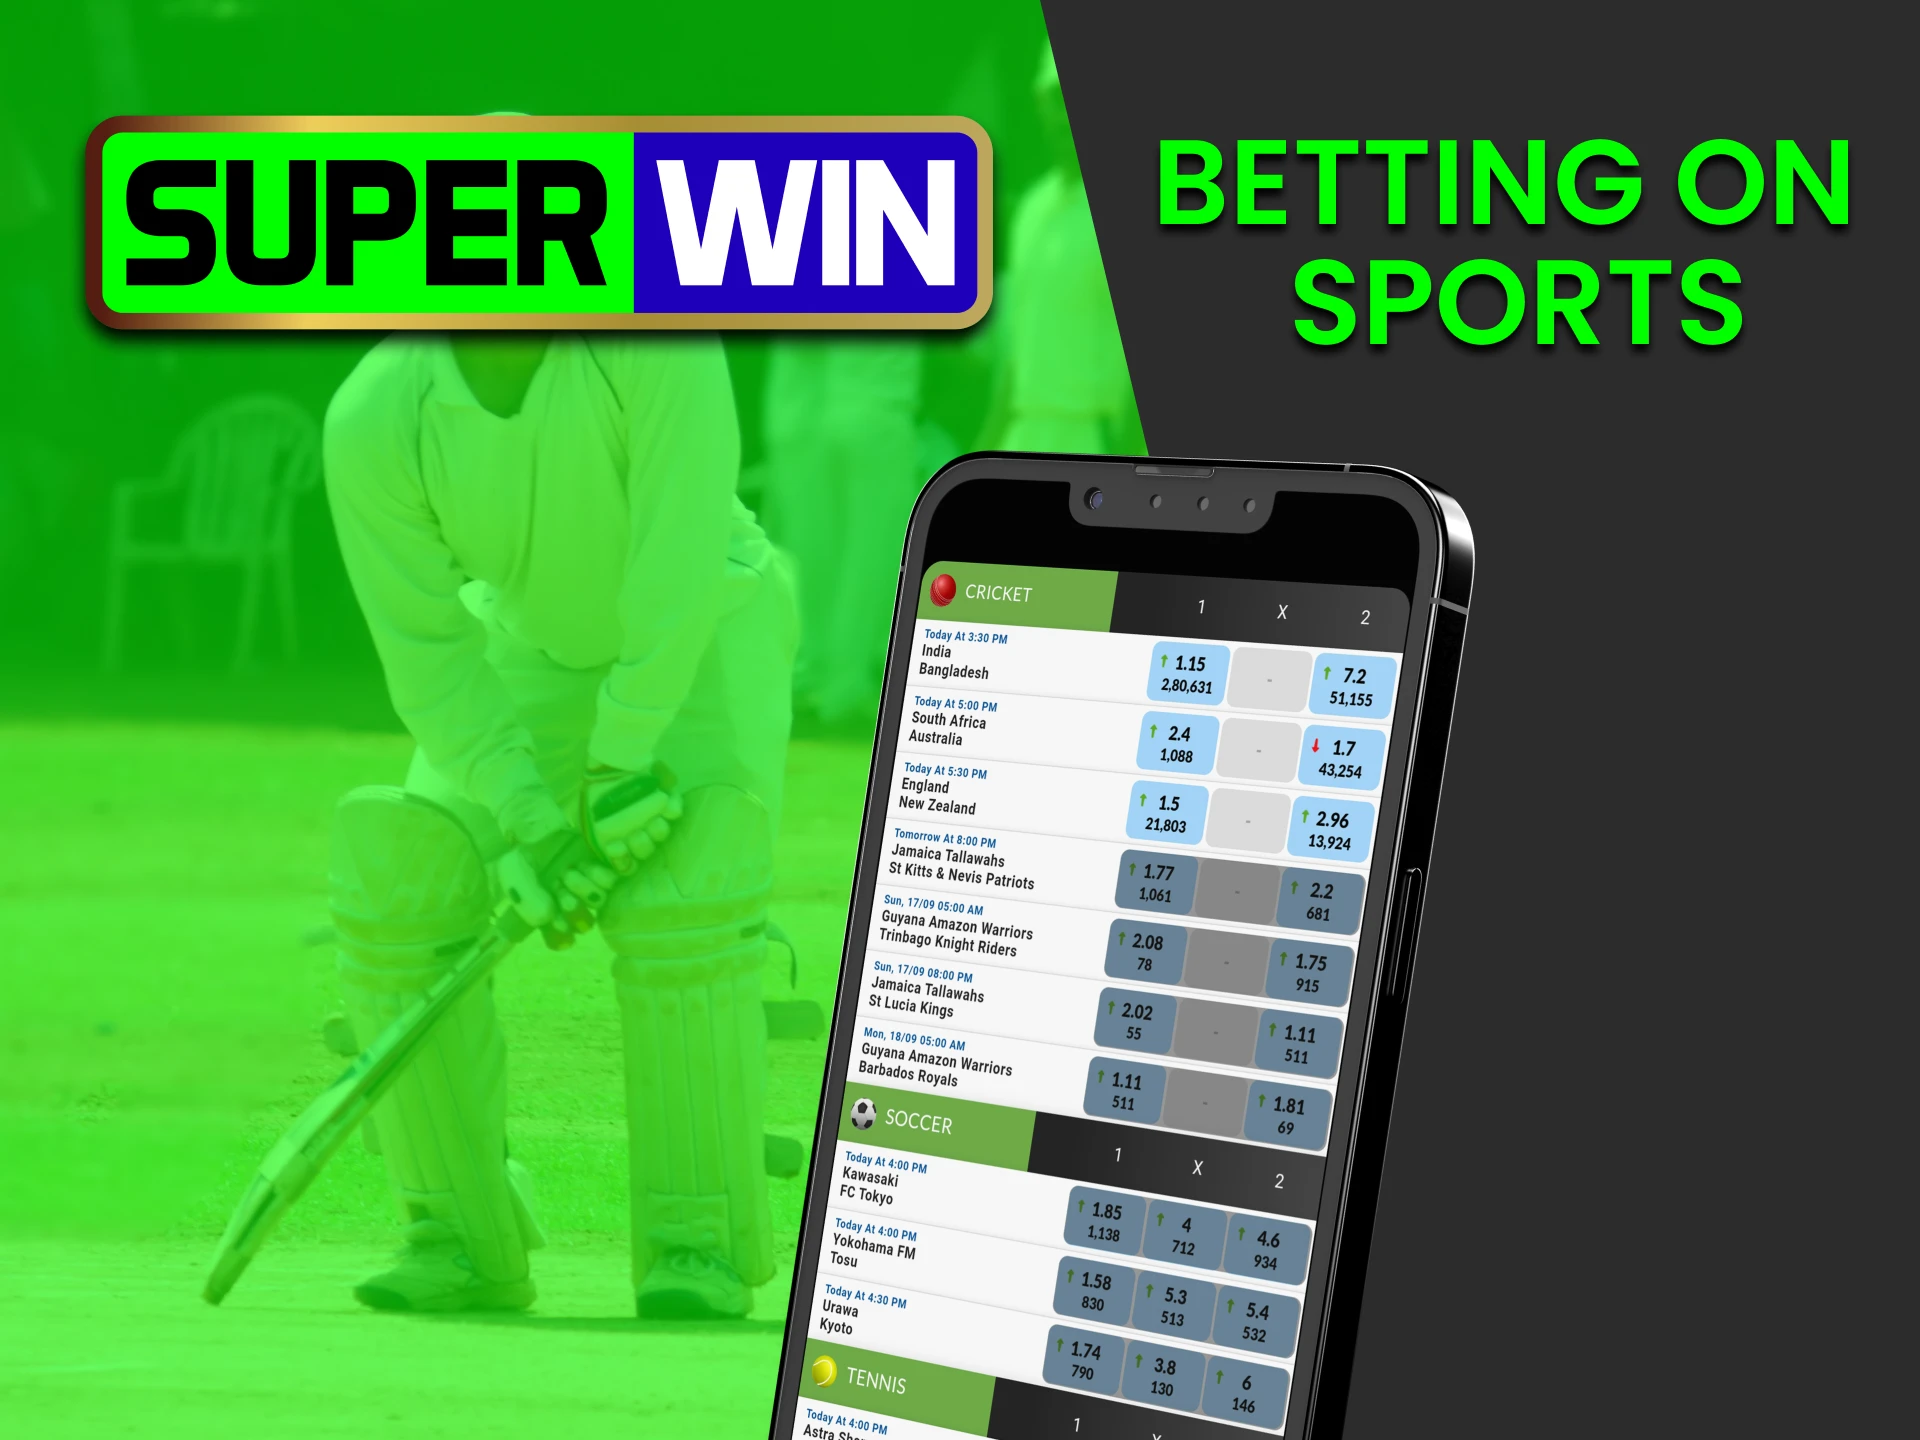 Place bets on sports through the Superwin app.